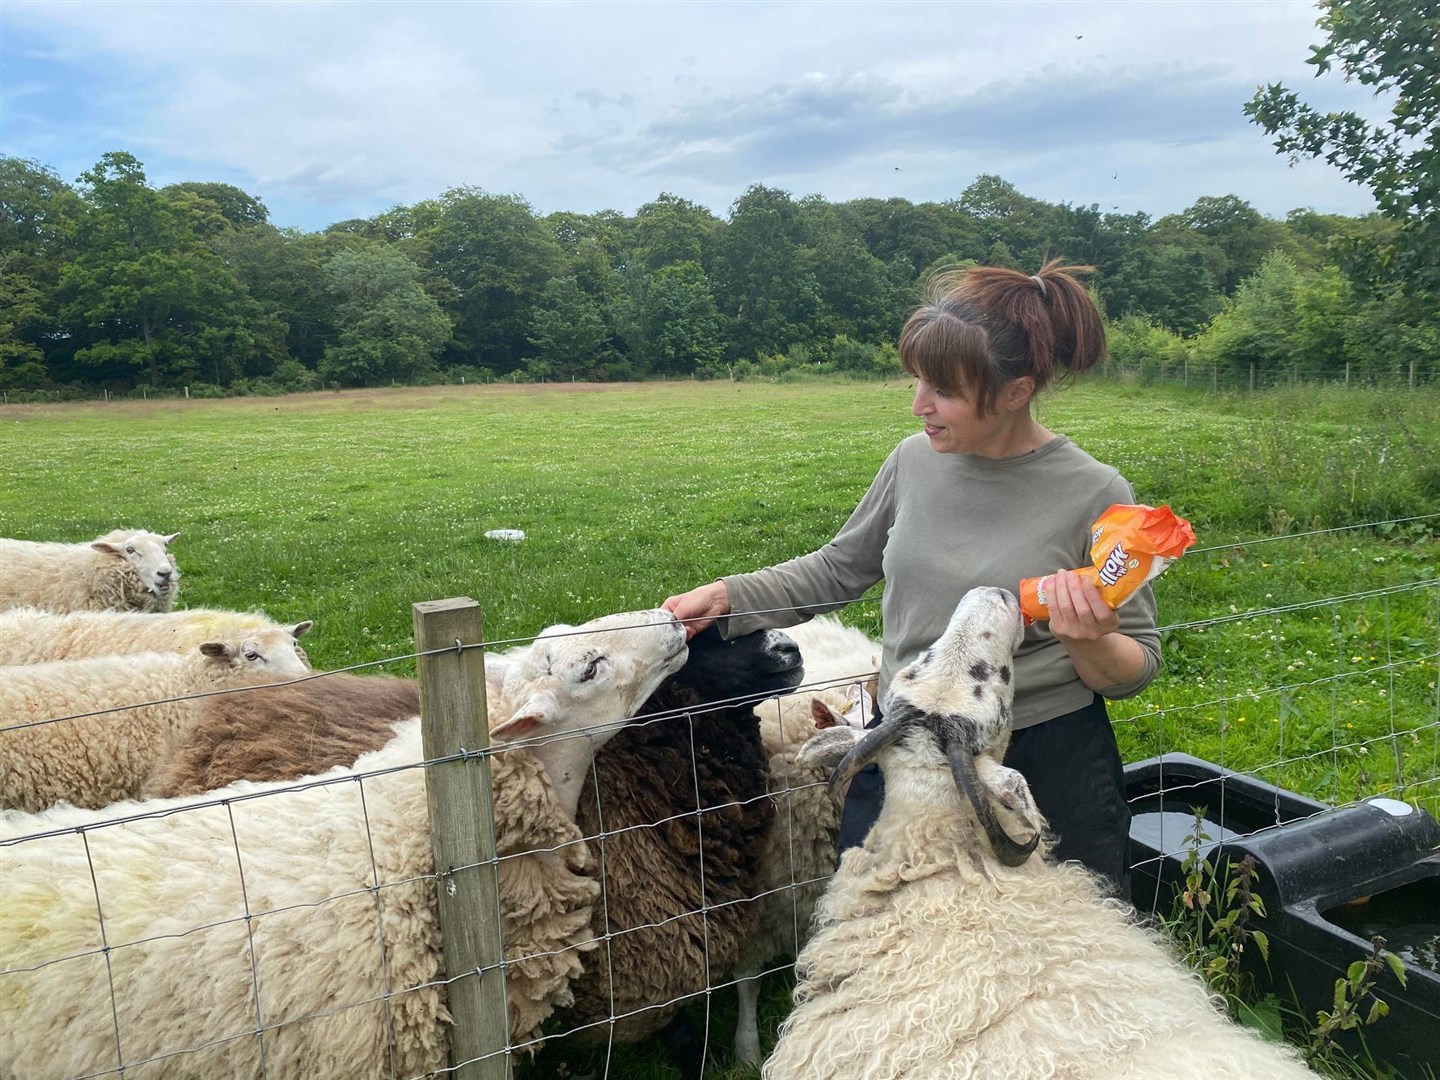 Irene feeds some gingernuts to her sheep.